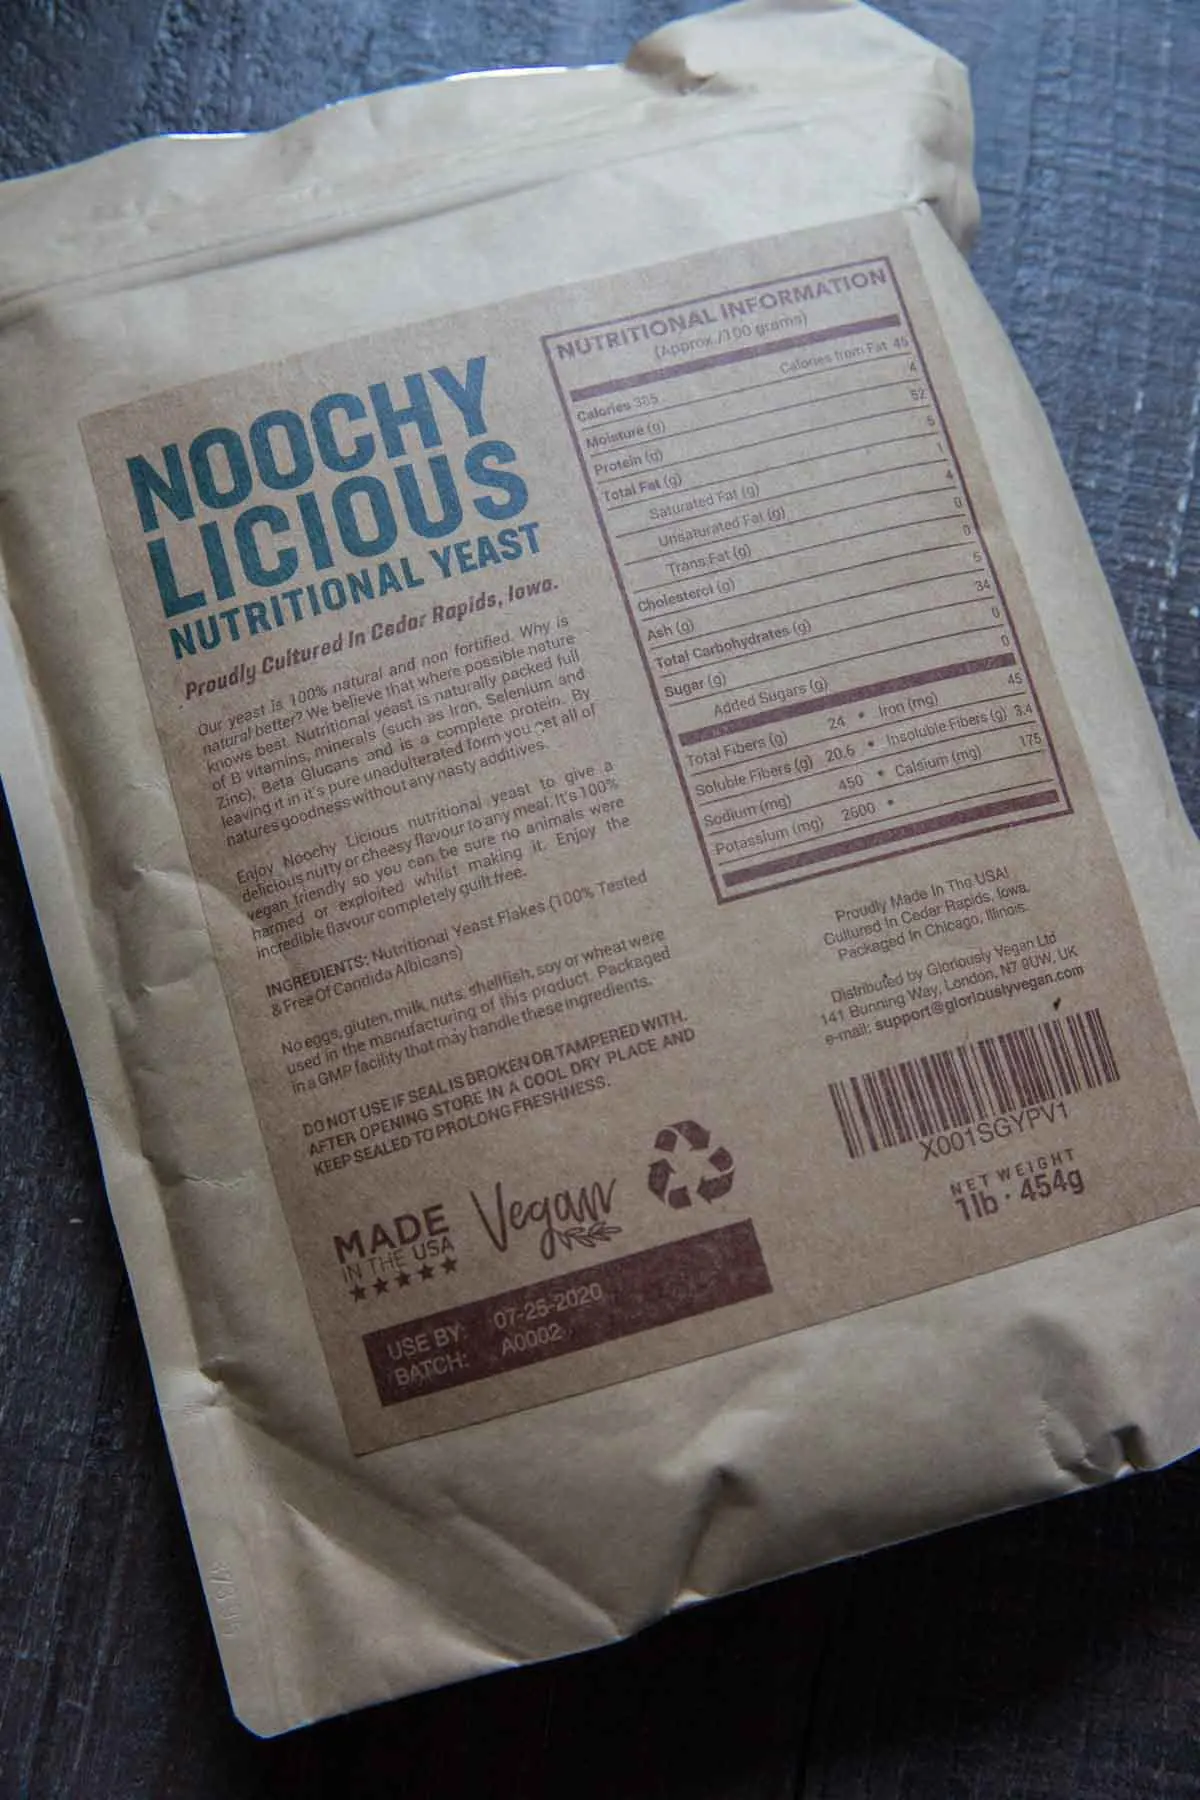 Noochy Licious nutritional yeast bag of bag with nutritional facts